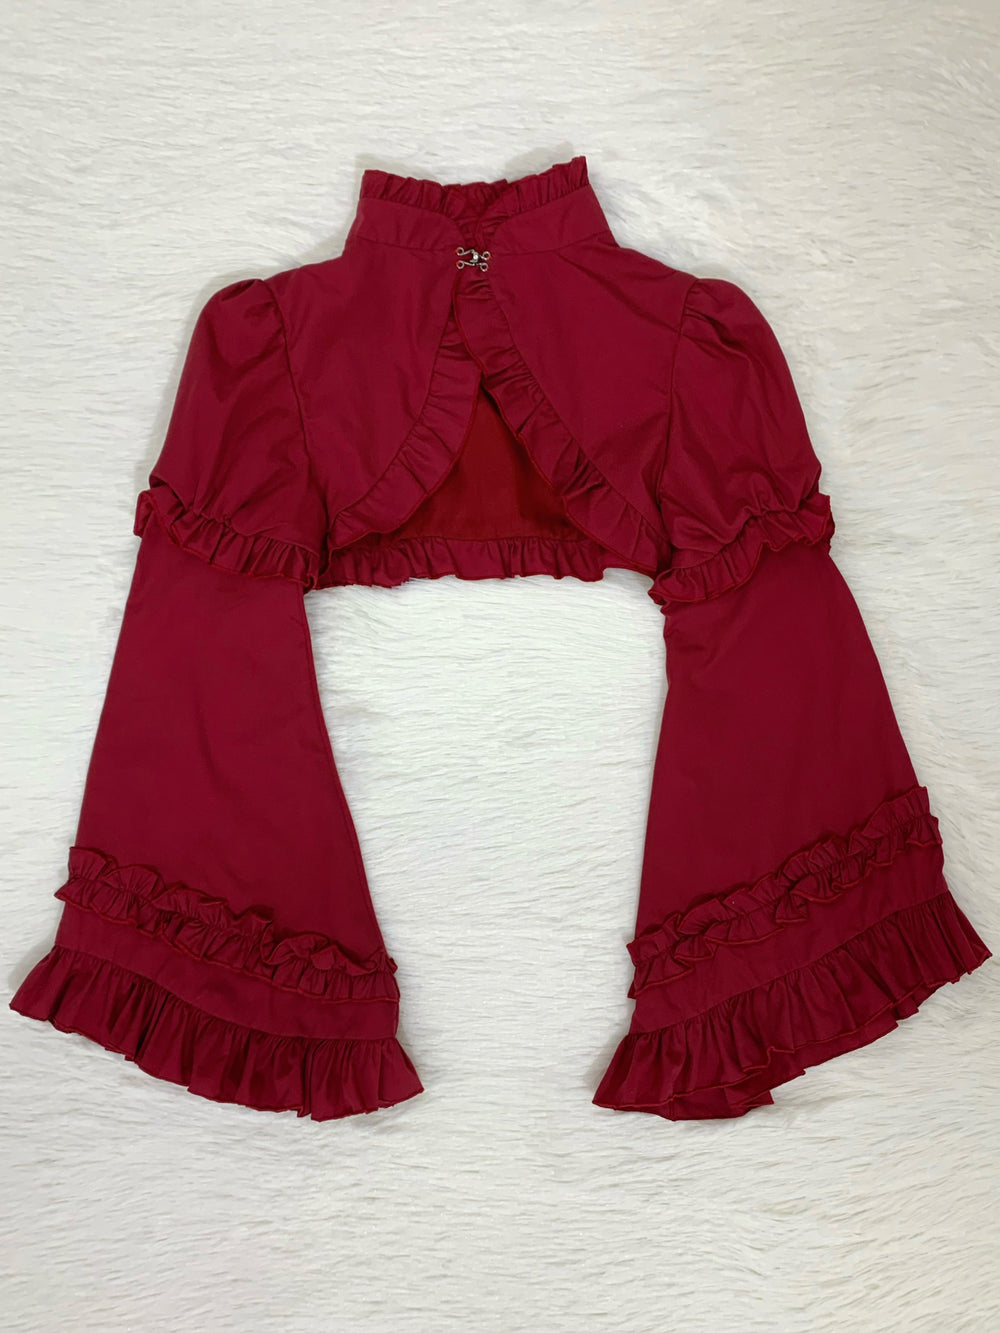 Mengfuzi~LiLith Accesspry Vintage Gothic Lolita Sleeves Bonnet Hairclips wine red patchwork sleeves 18332:251676